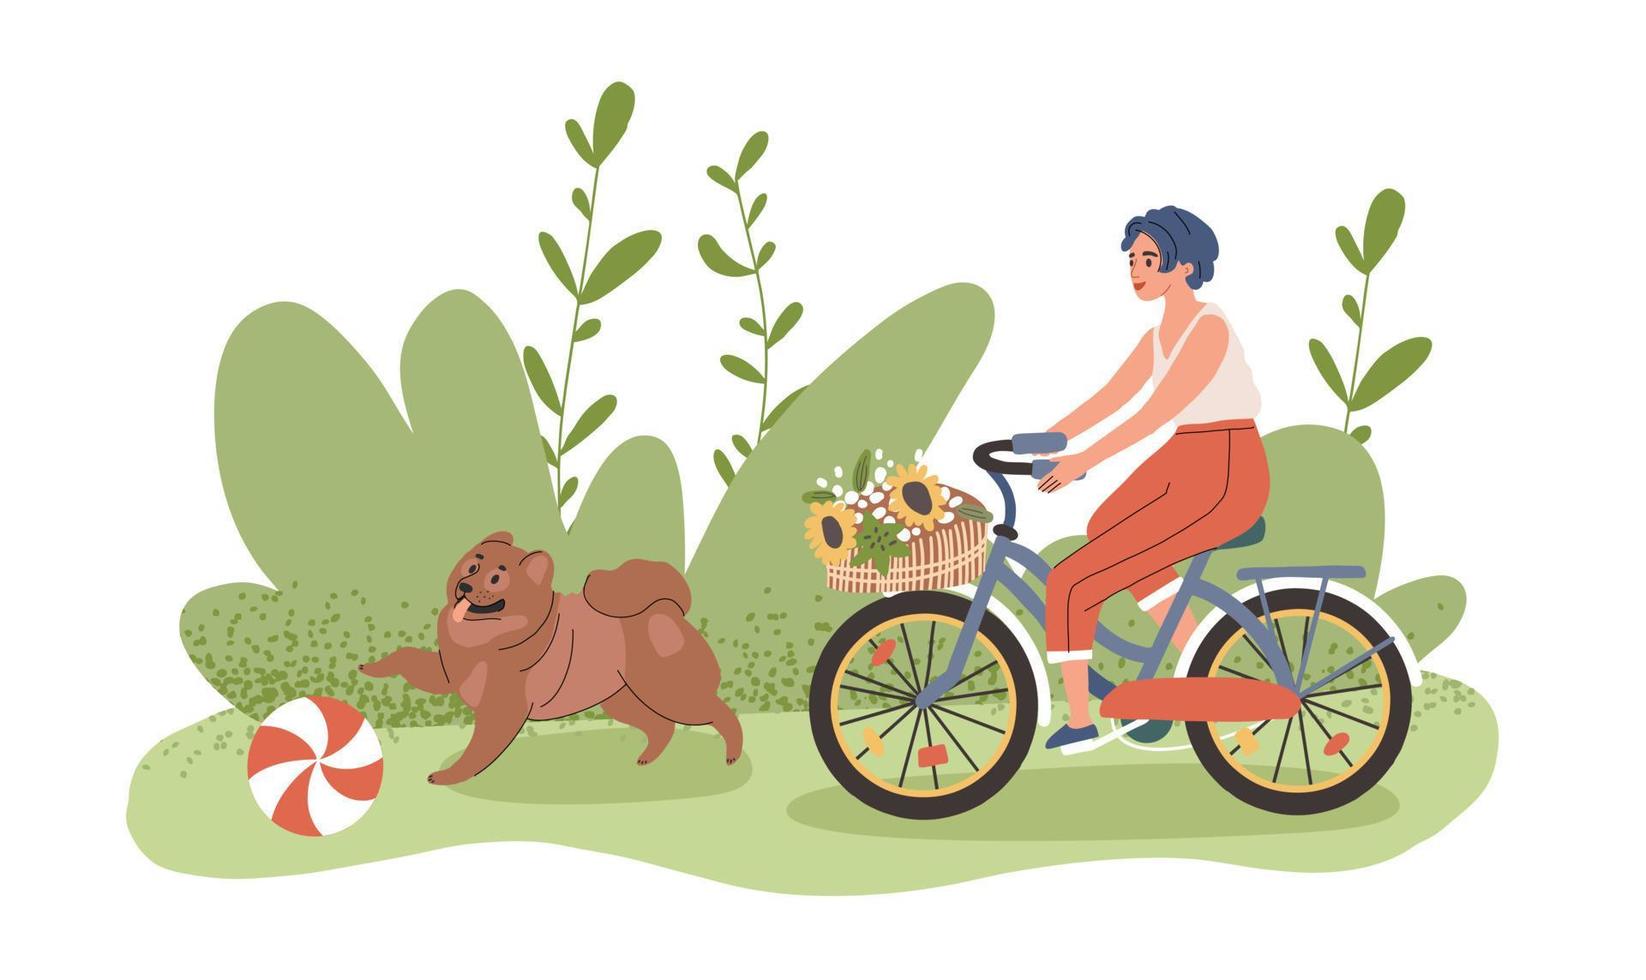 A girl rides a bicycle and a cheerful dog runs next to her. Vector illustration of outdoor recreation